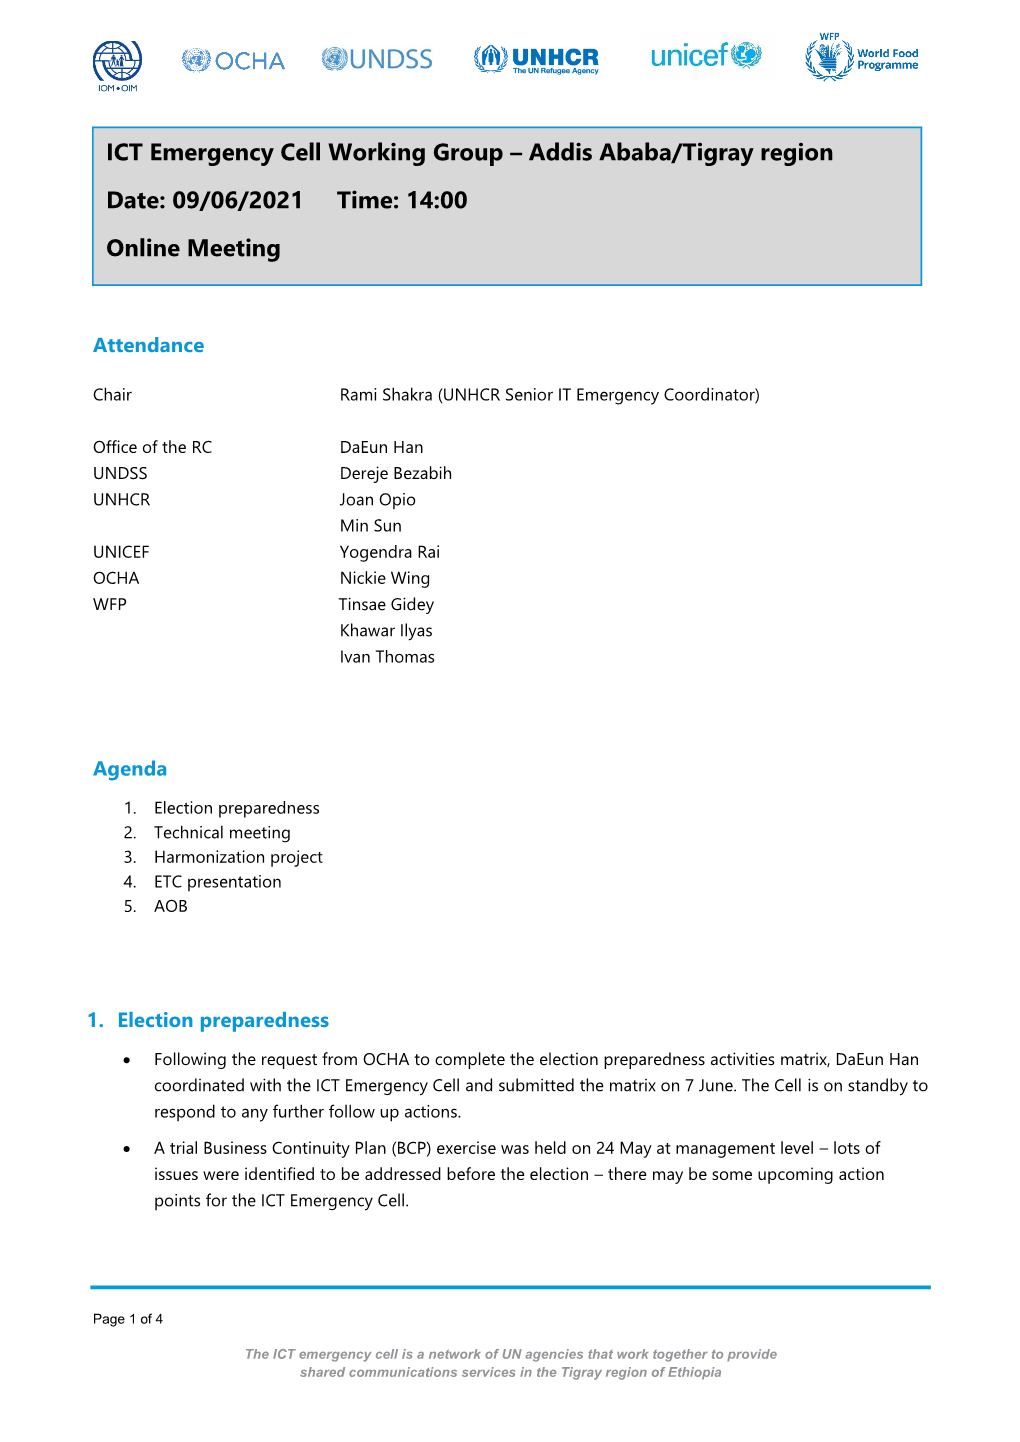 ICT Emergency Cell Working Group – Addis Ababa/Tigray Region Date: 09/06/2021 Time: 14:00 Online Meeting